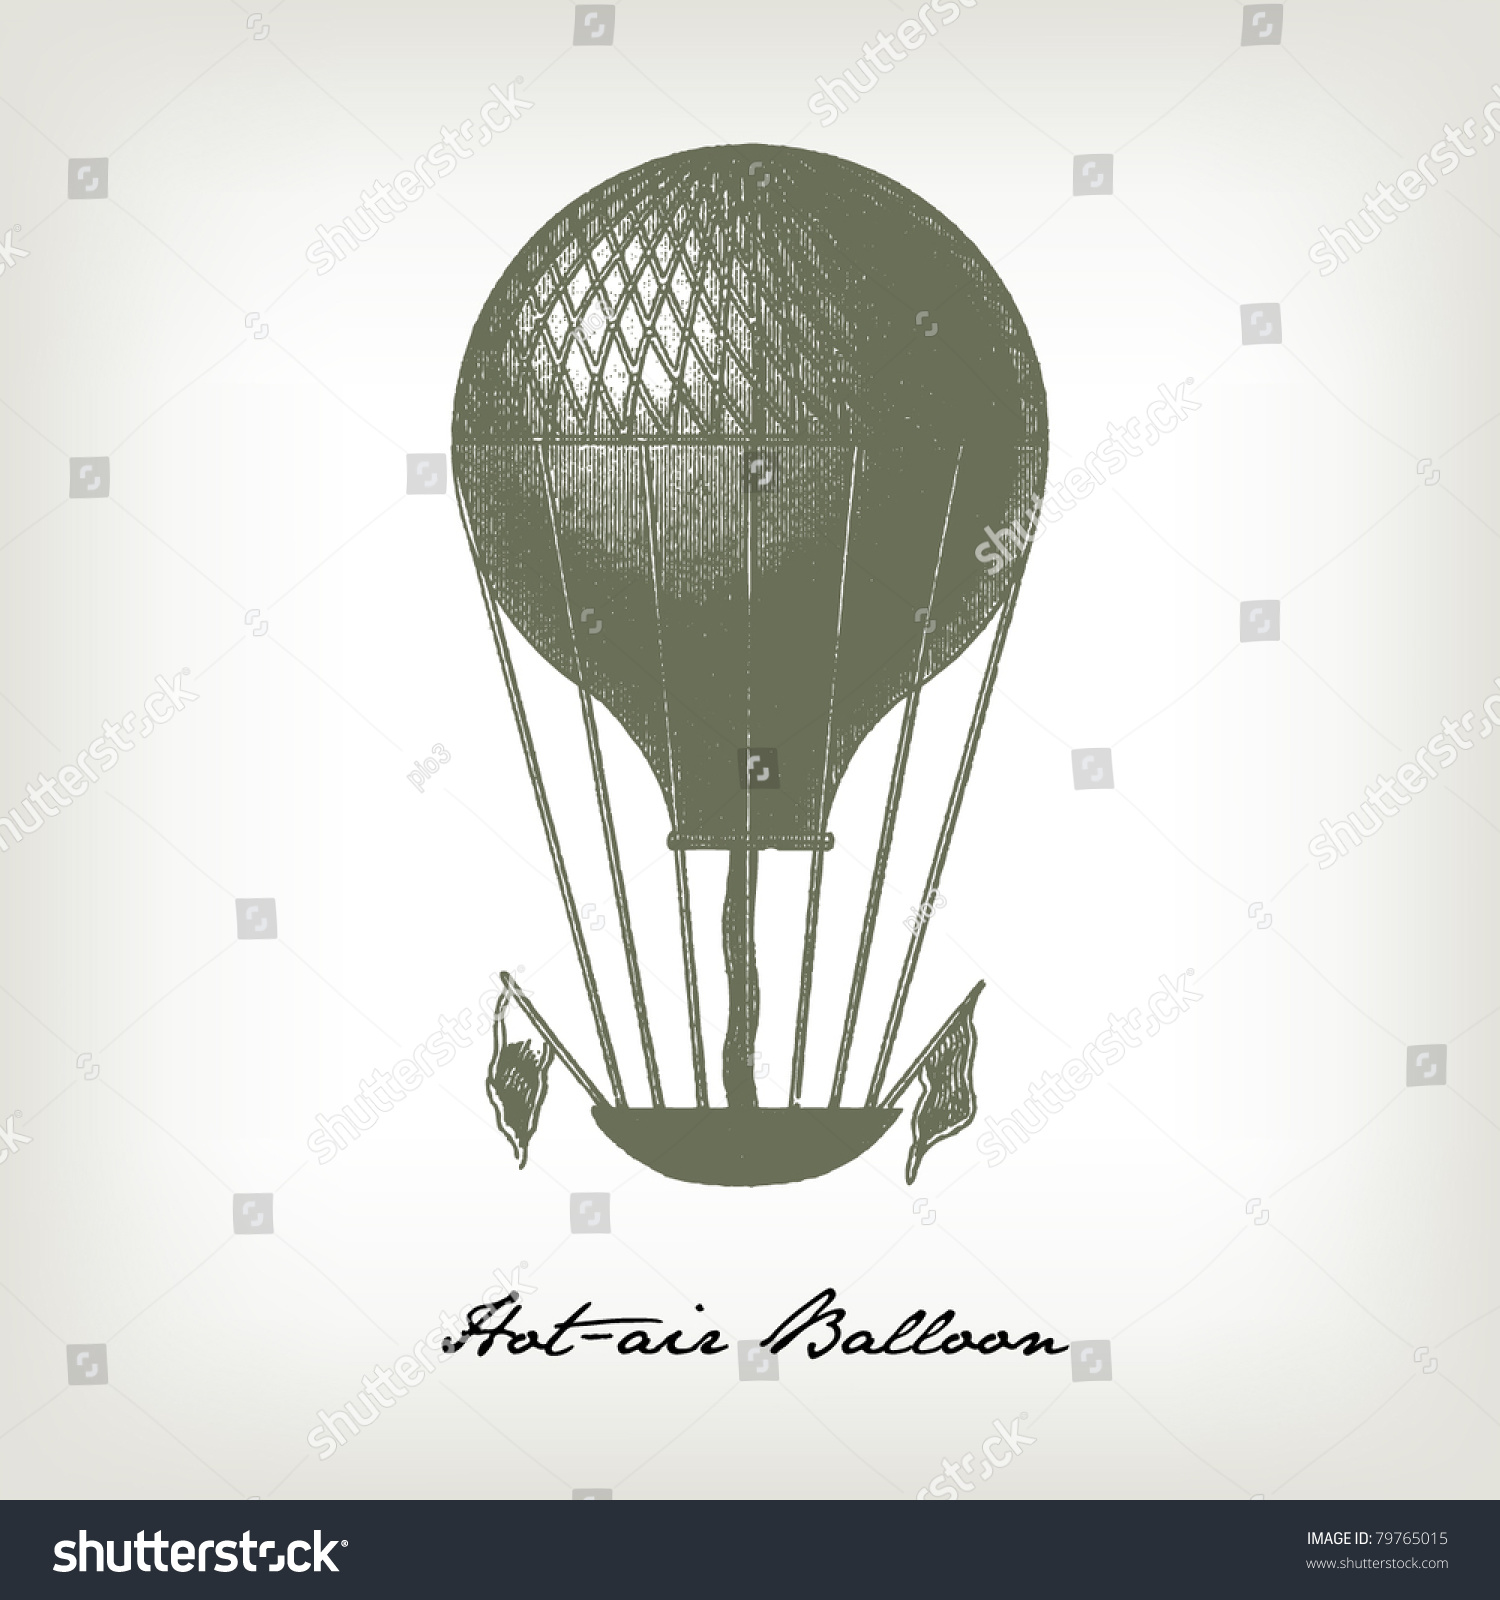 SVG of Engraving vintage Hot-air Balloon from 